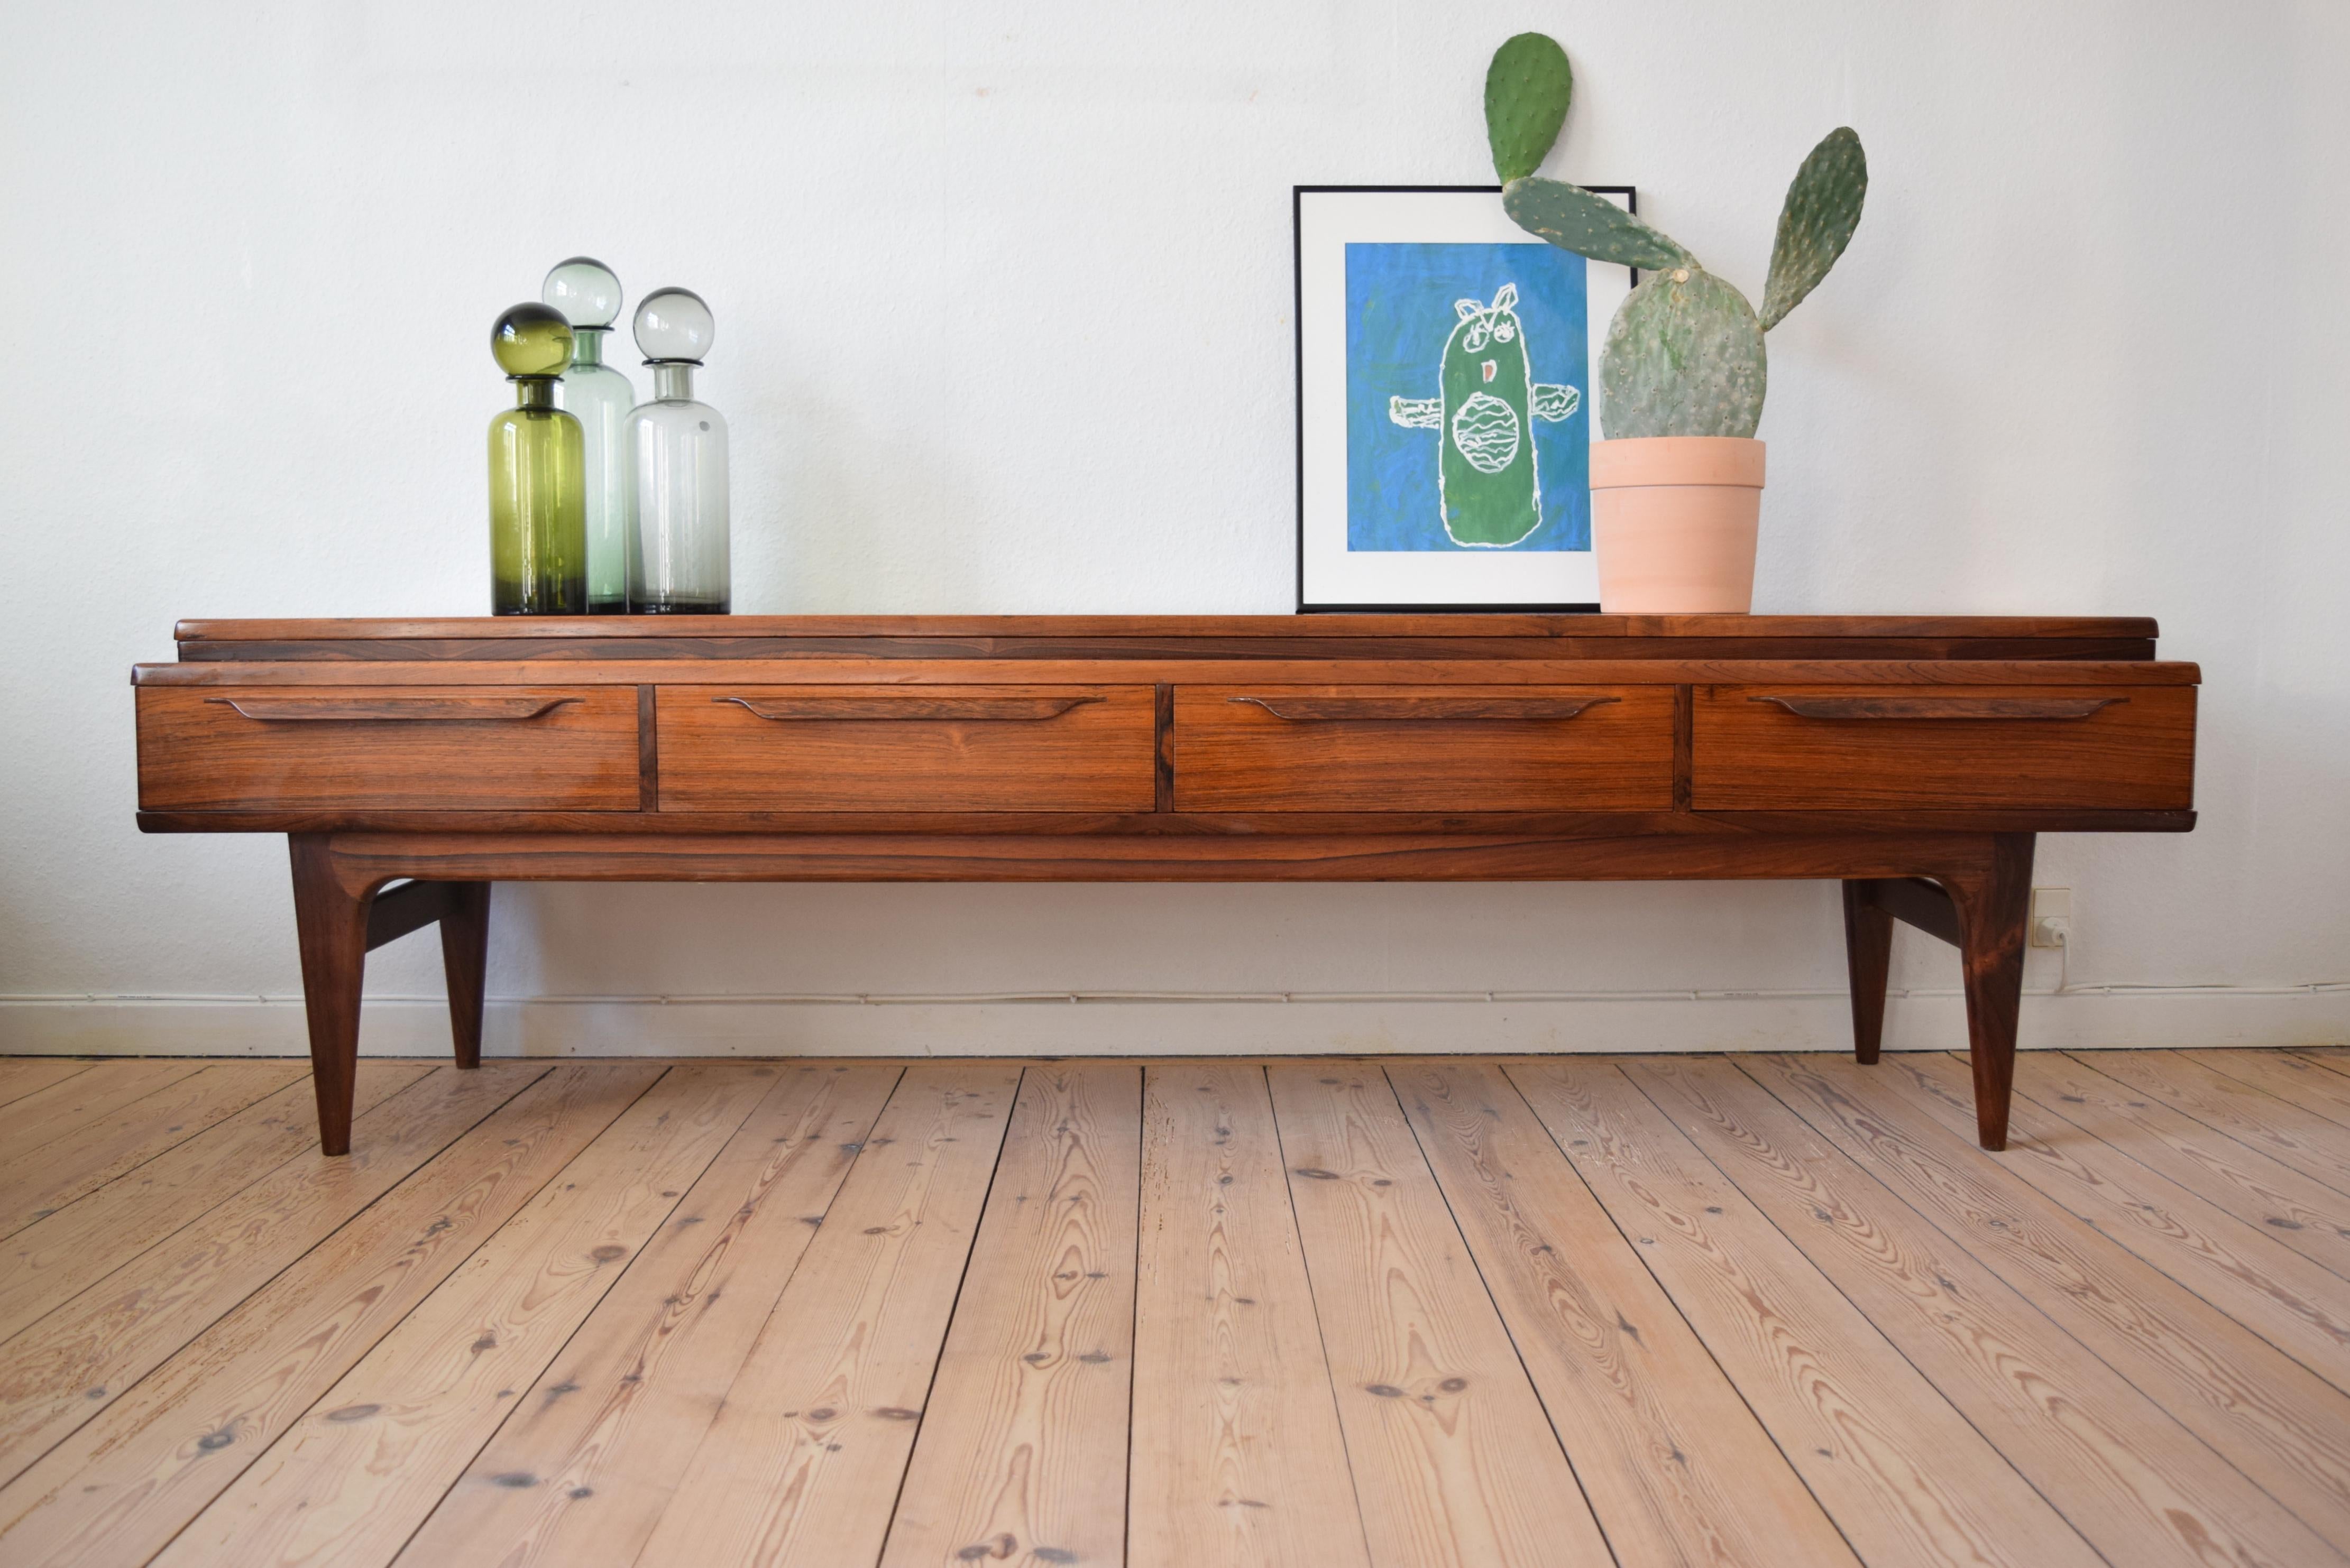 Midcentury rosewood sideboard or media console manufactured in Denmark in the 1960s. Features four drawers on the front with solid rosewood leaf handles. One drawer has an removable insert drawer with felt lining. Sits on rosewood frame base legs.